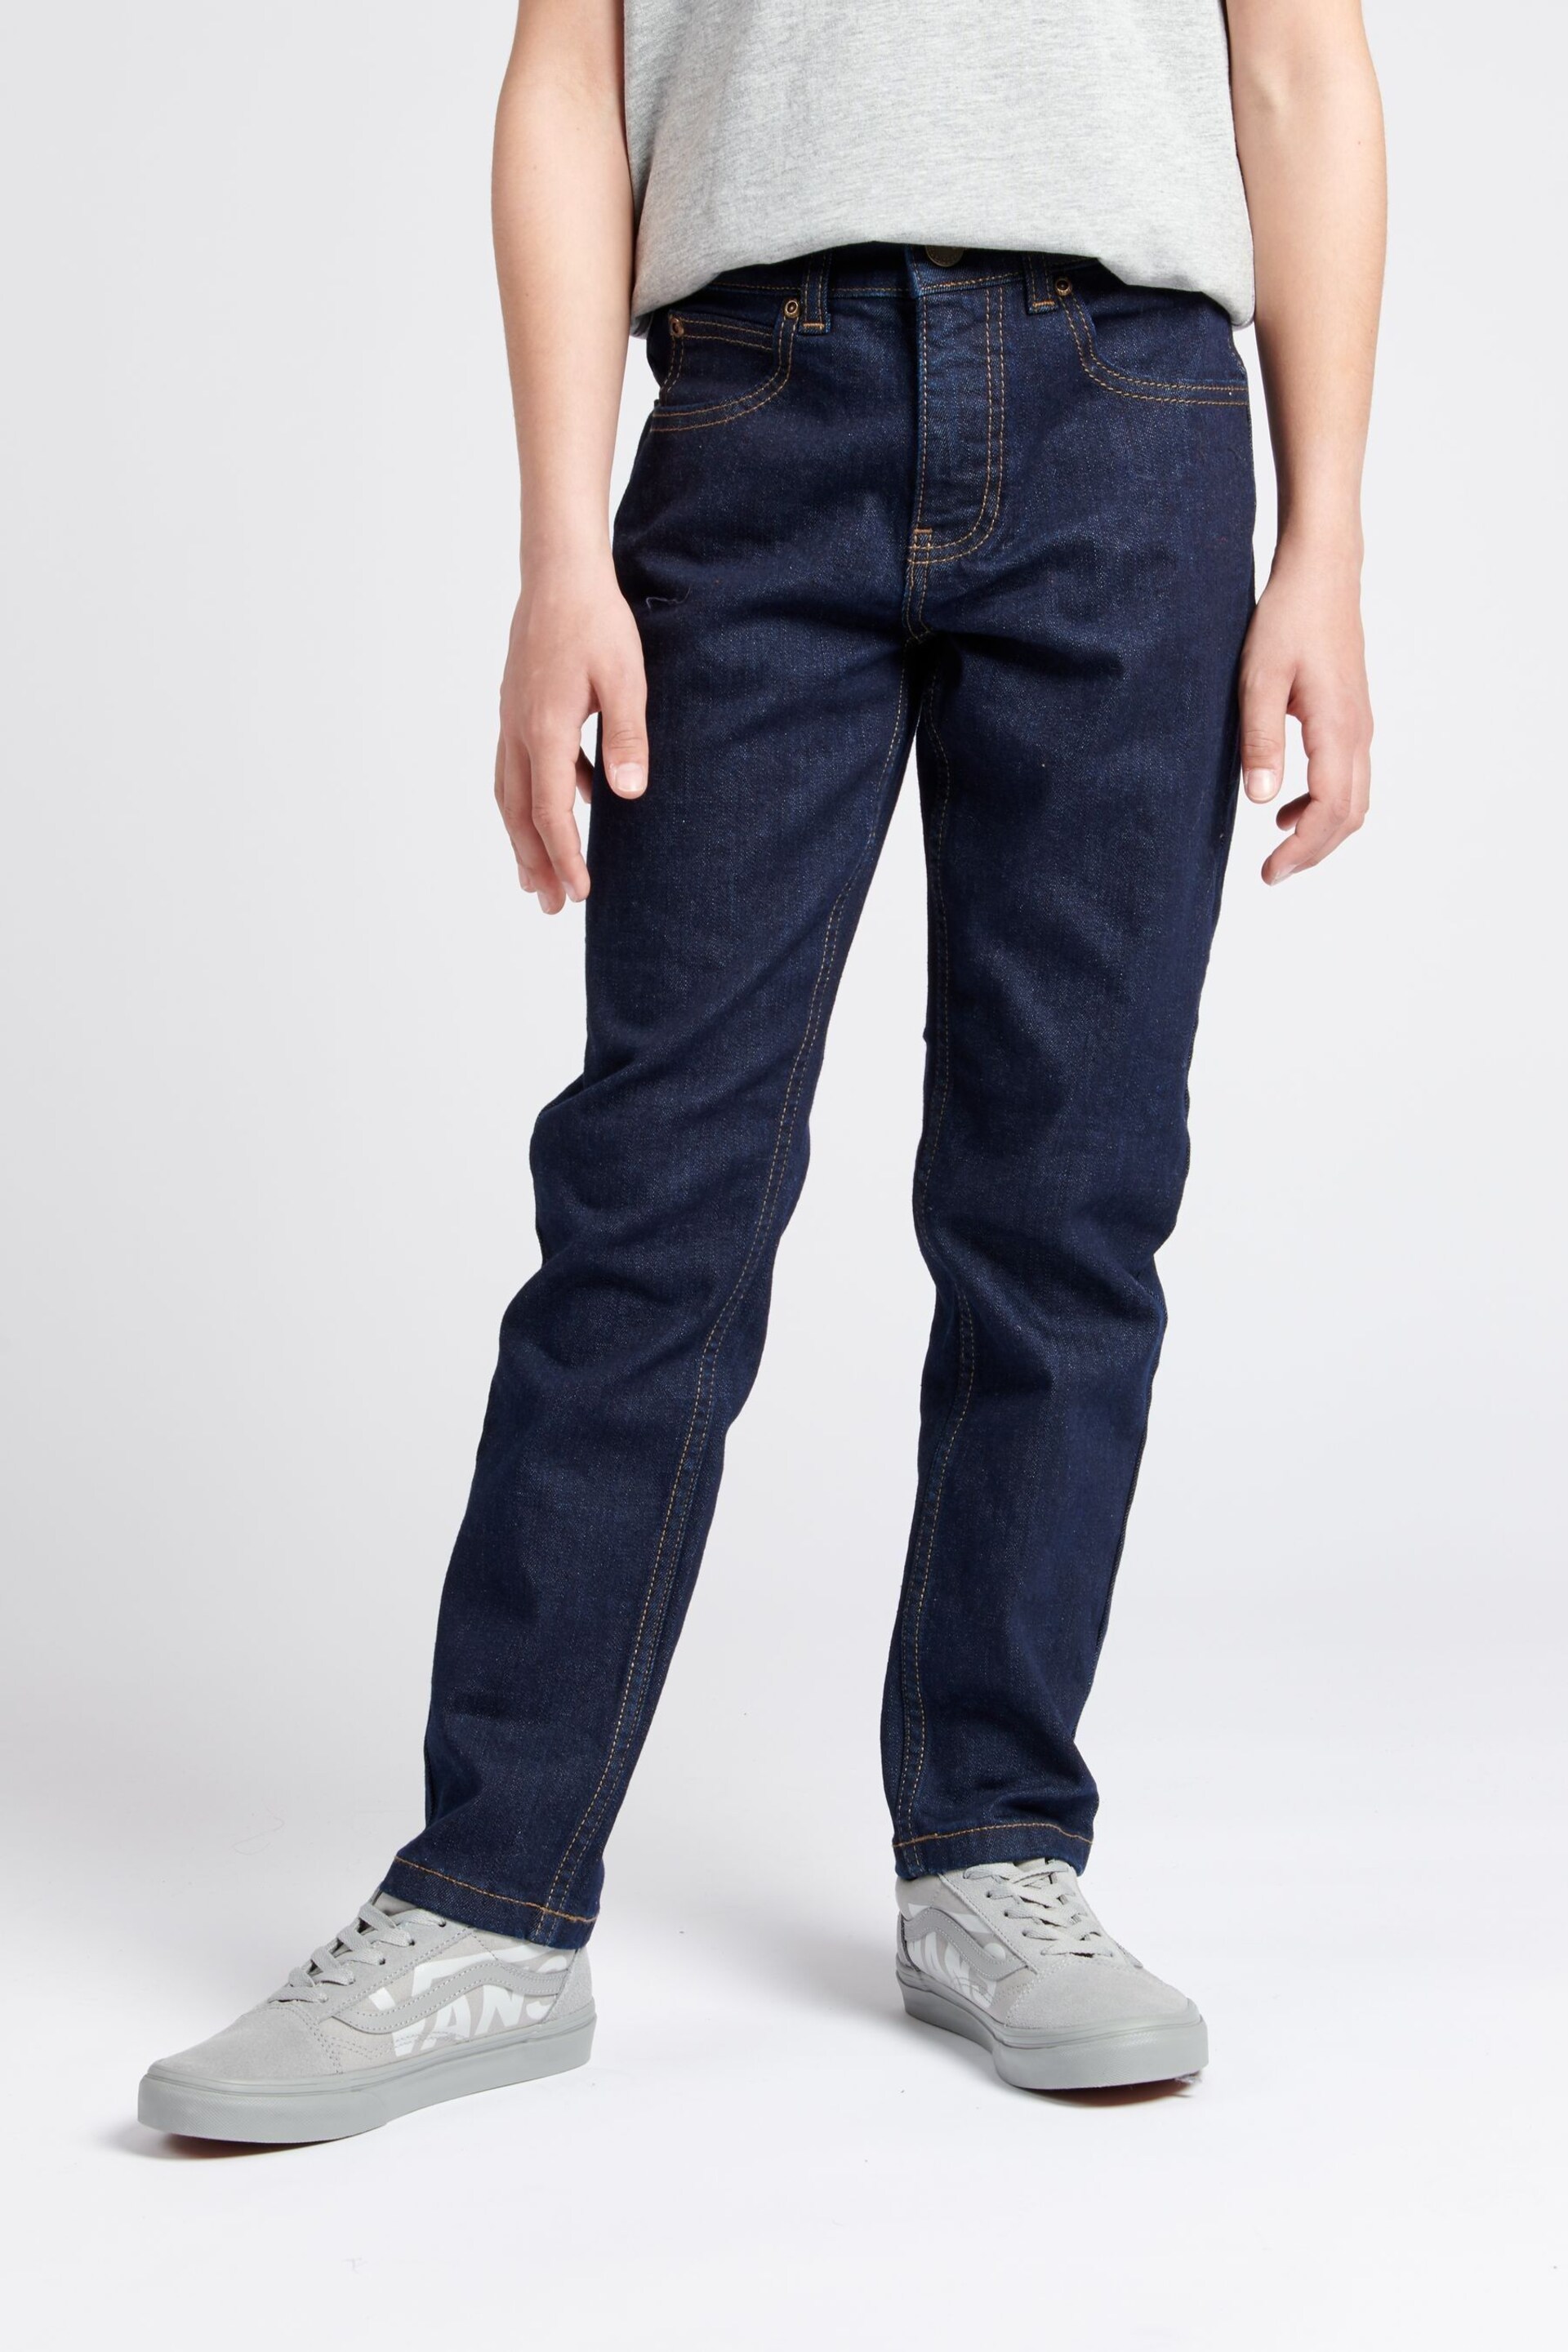 Lee Boys Daren Straight Fit Jeans - Image 1 of 7